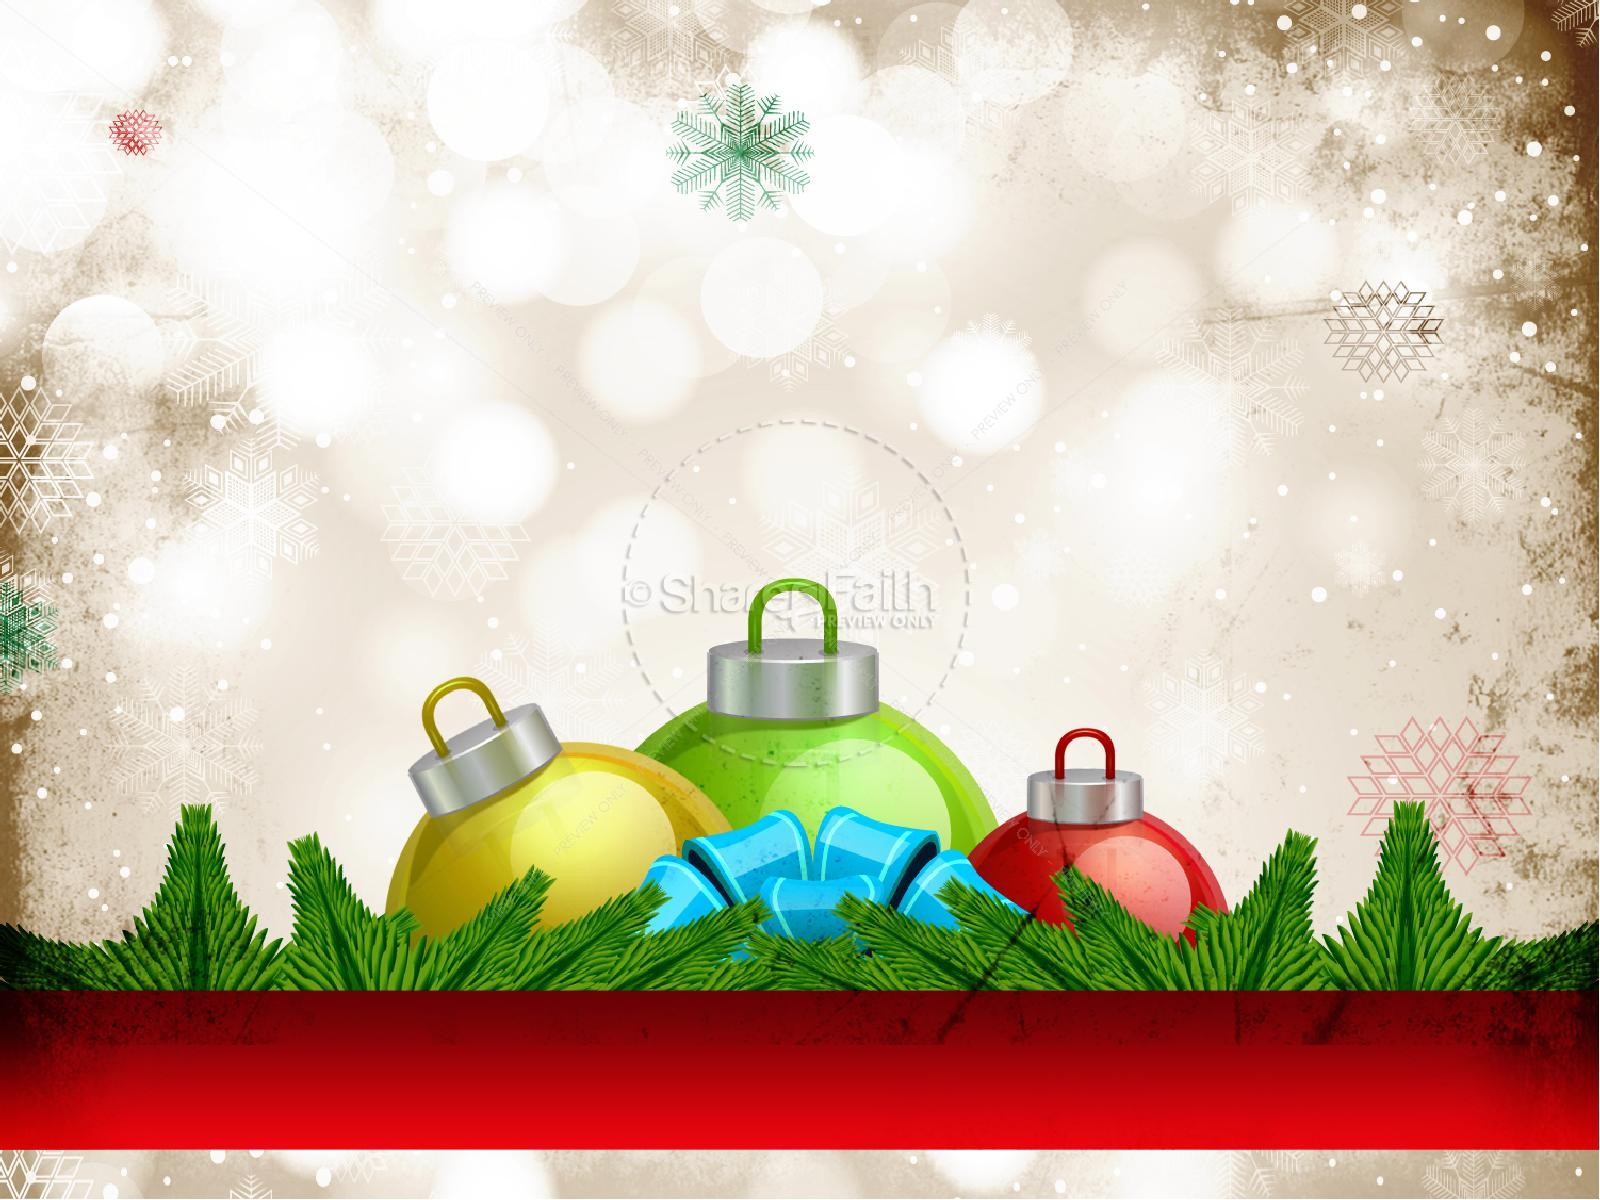 Merry Christmas Church PowerPoint Template Animated Christmas Powerpoint Backgrounds